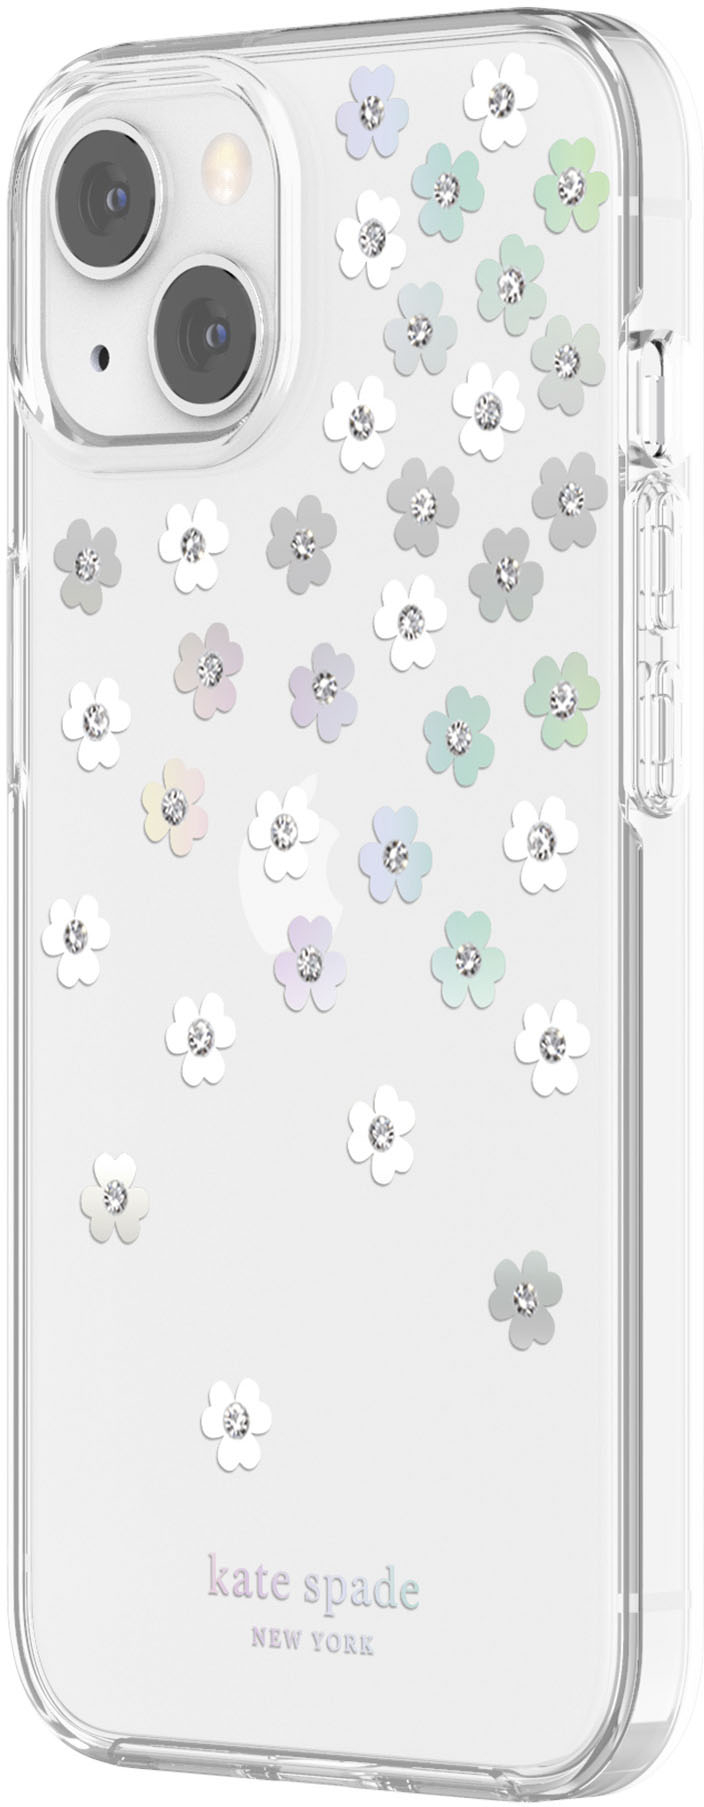 Angle View: kate spade new york - Protective Hardshell Case for iPhone 13 - Flower